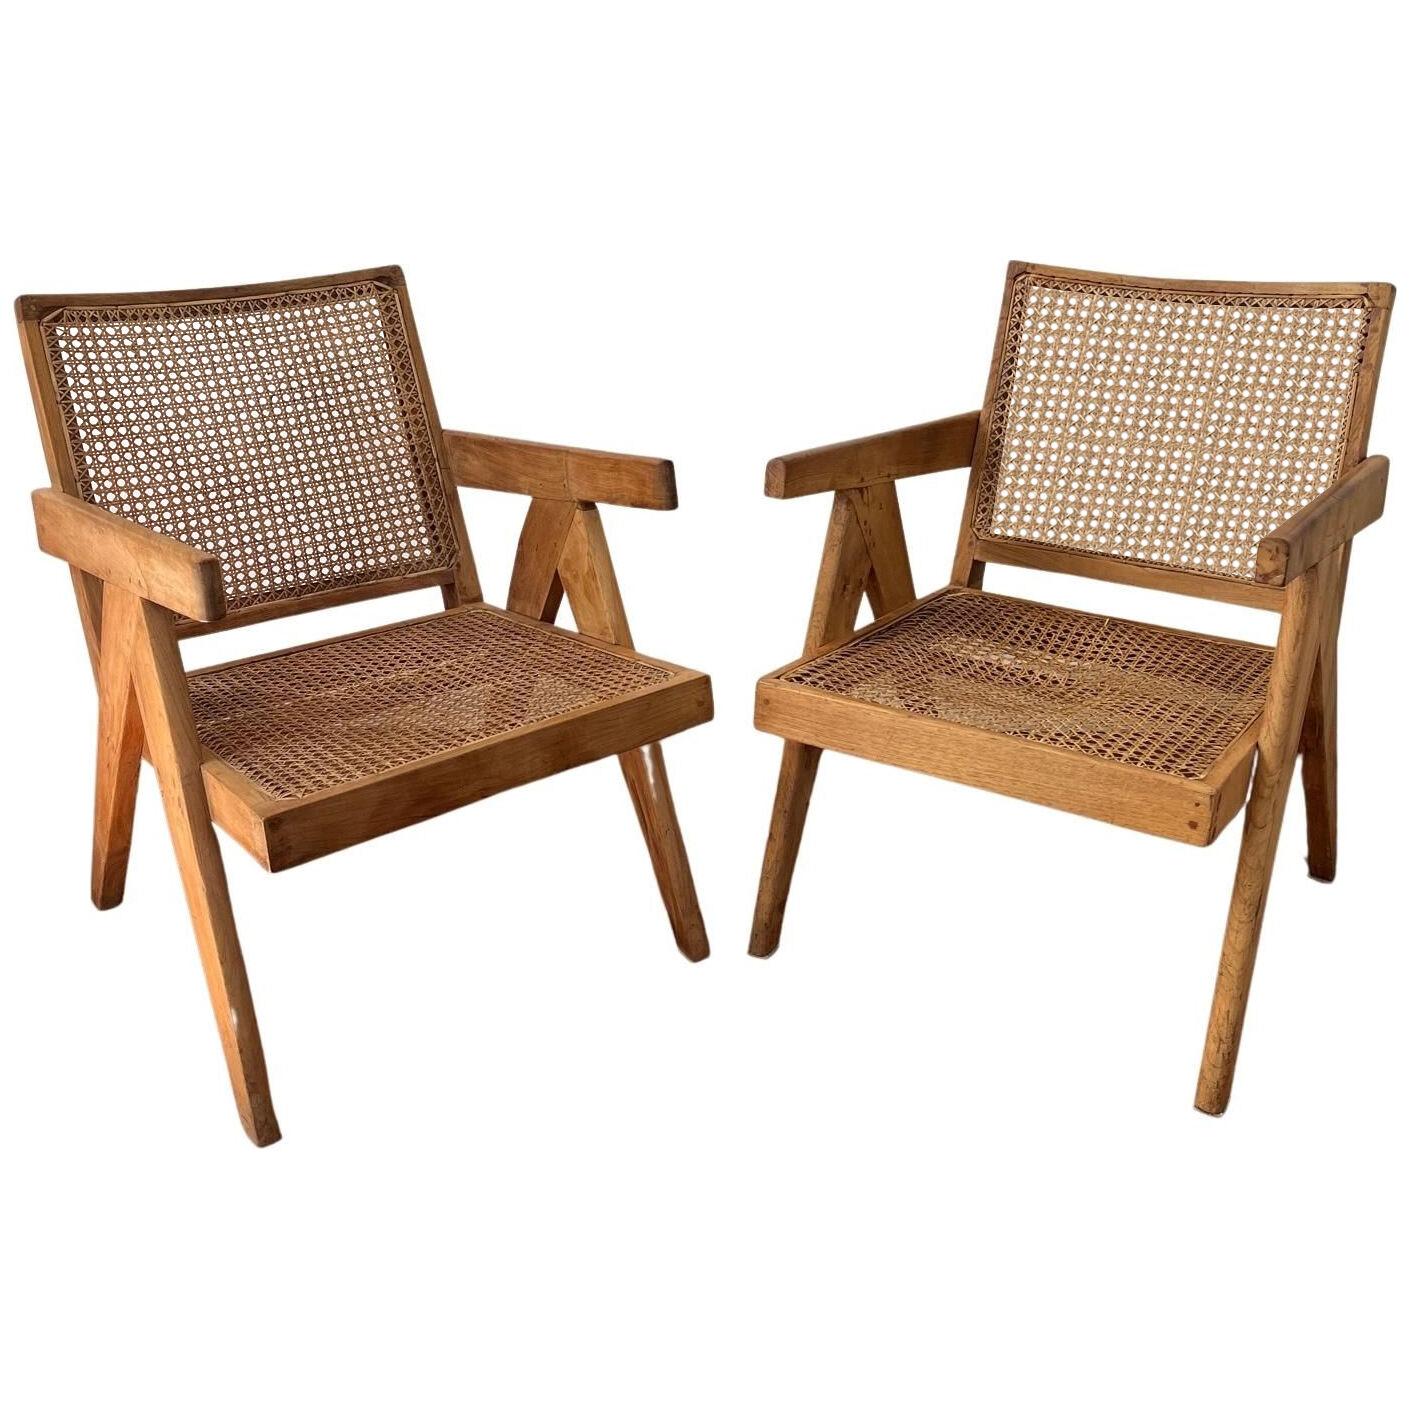 Set of 2 Easy Armchair from Pierre Jeanneret, Chandigarh, 1958